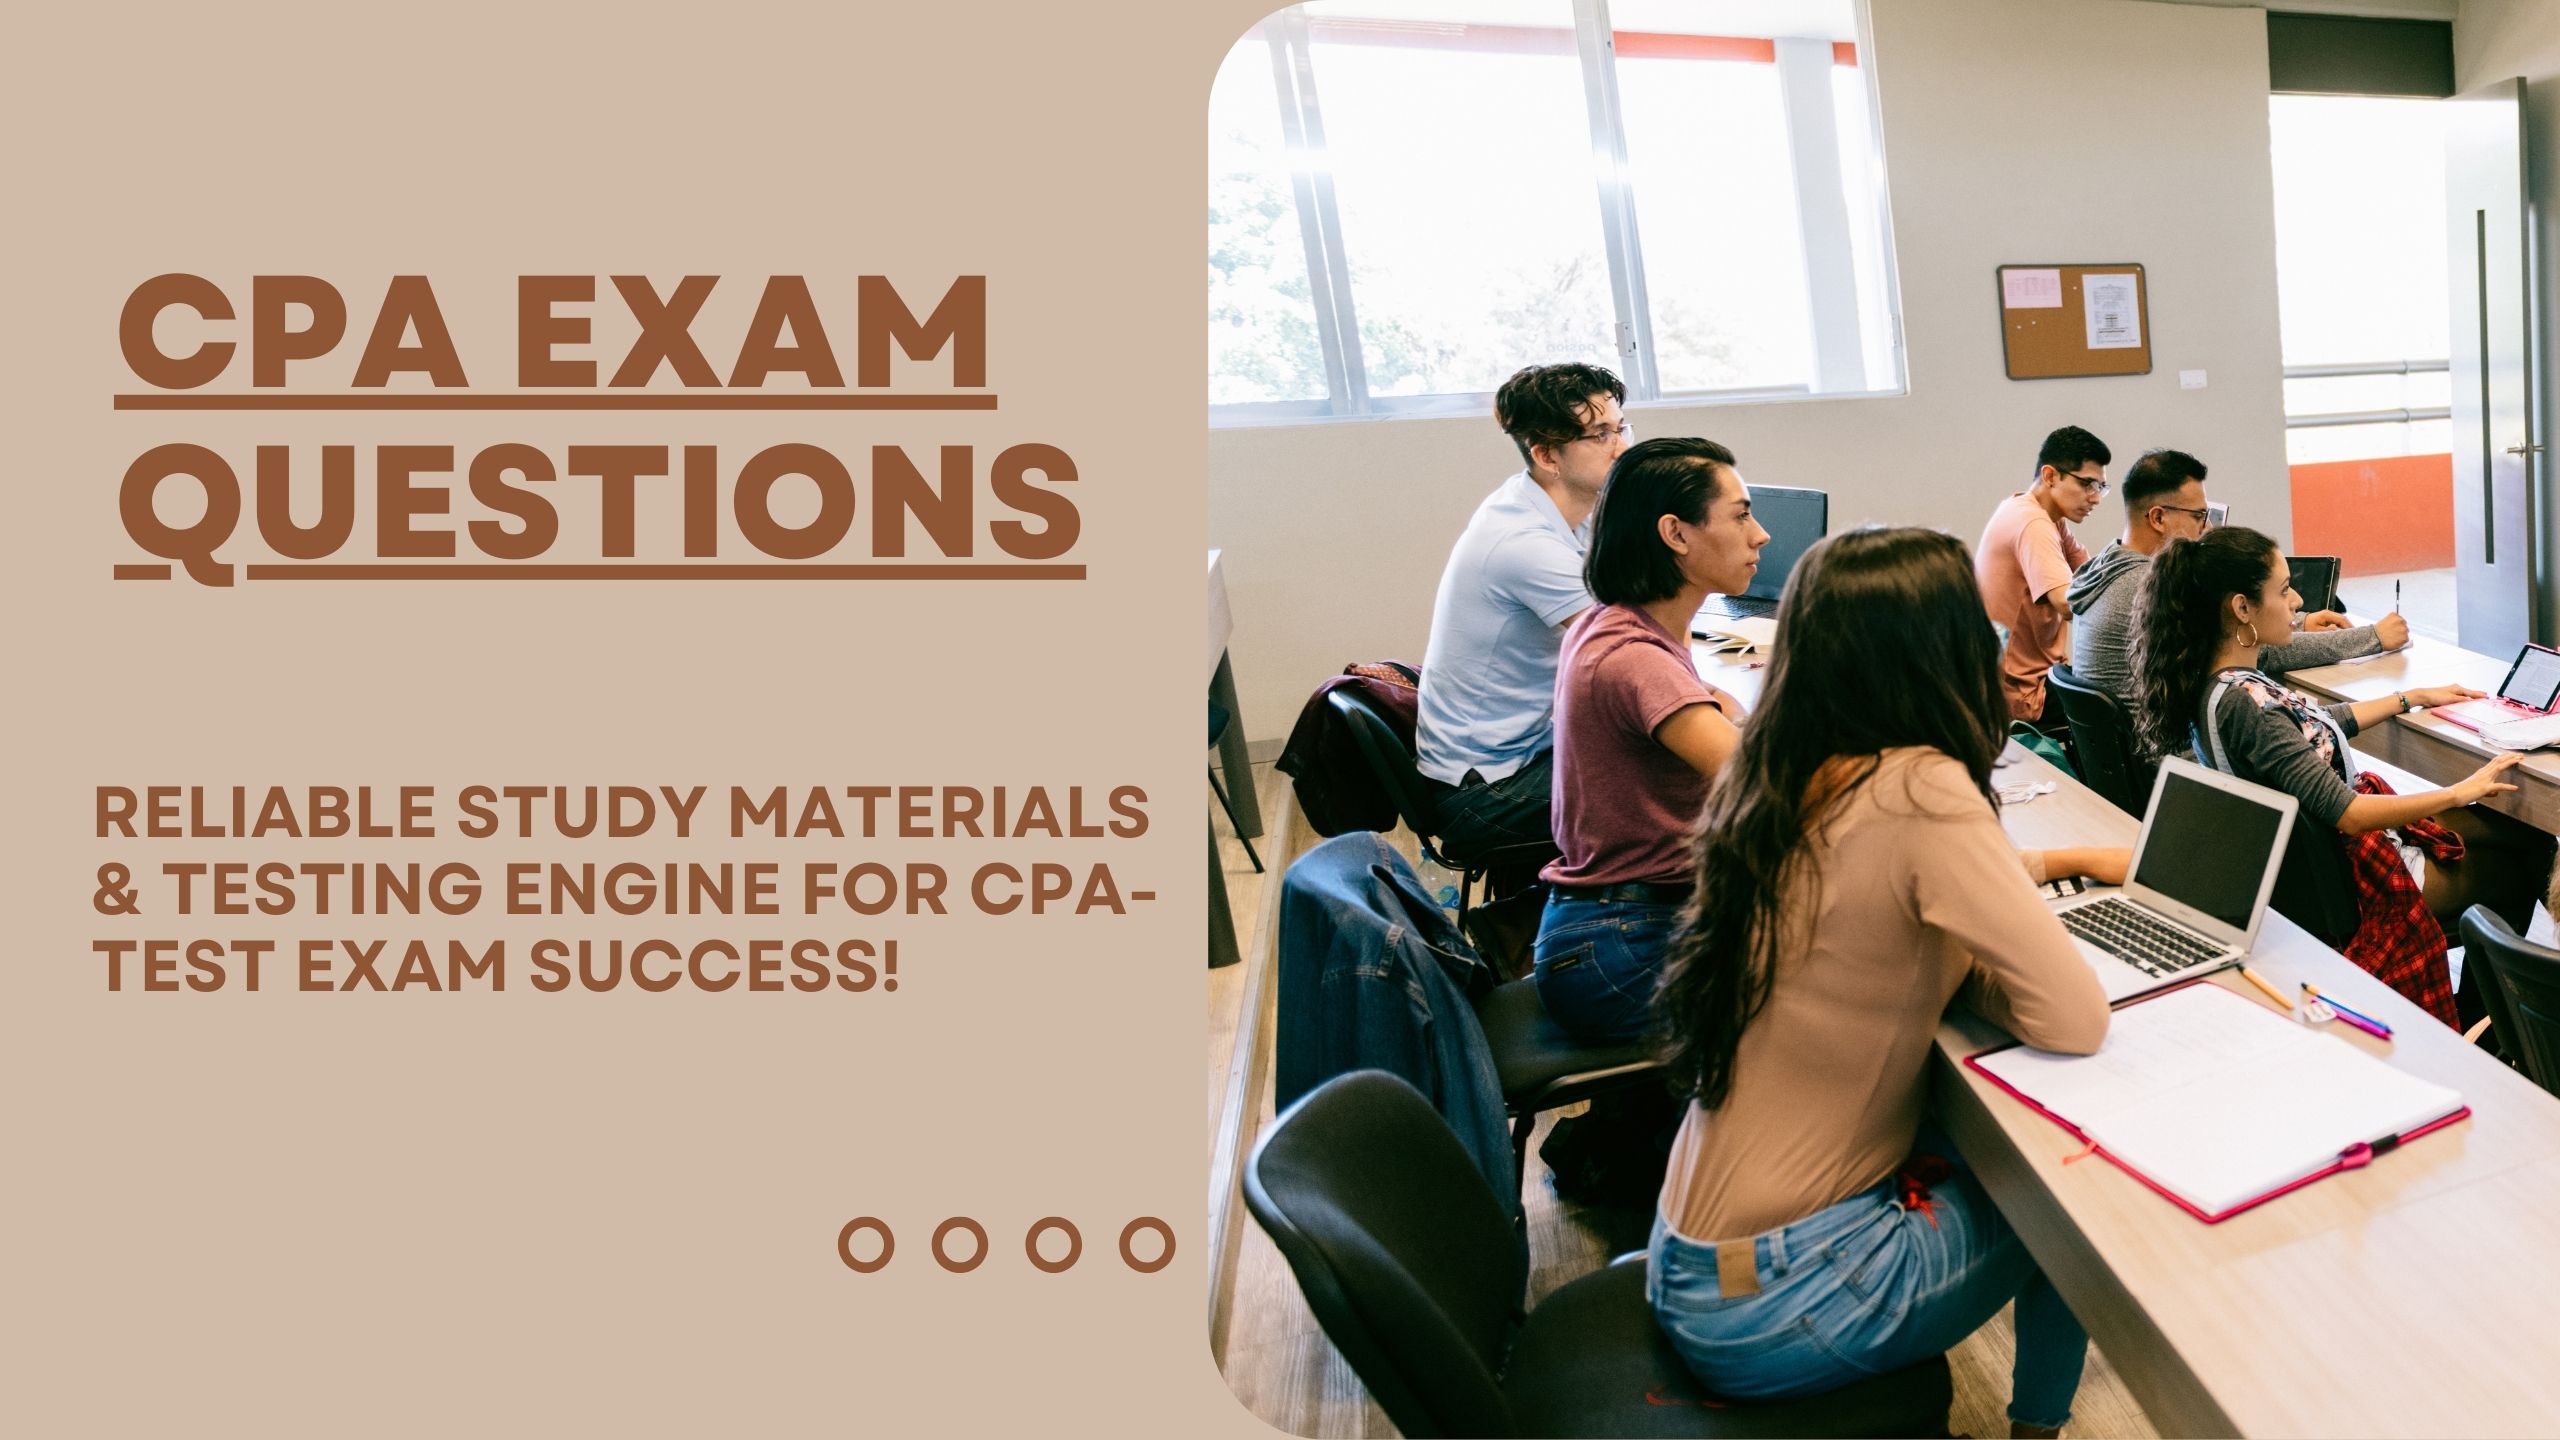 How to Interpret CPA Exam Questions Correctly?